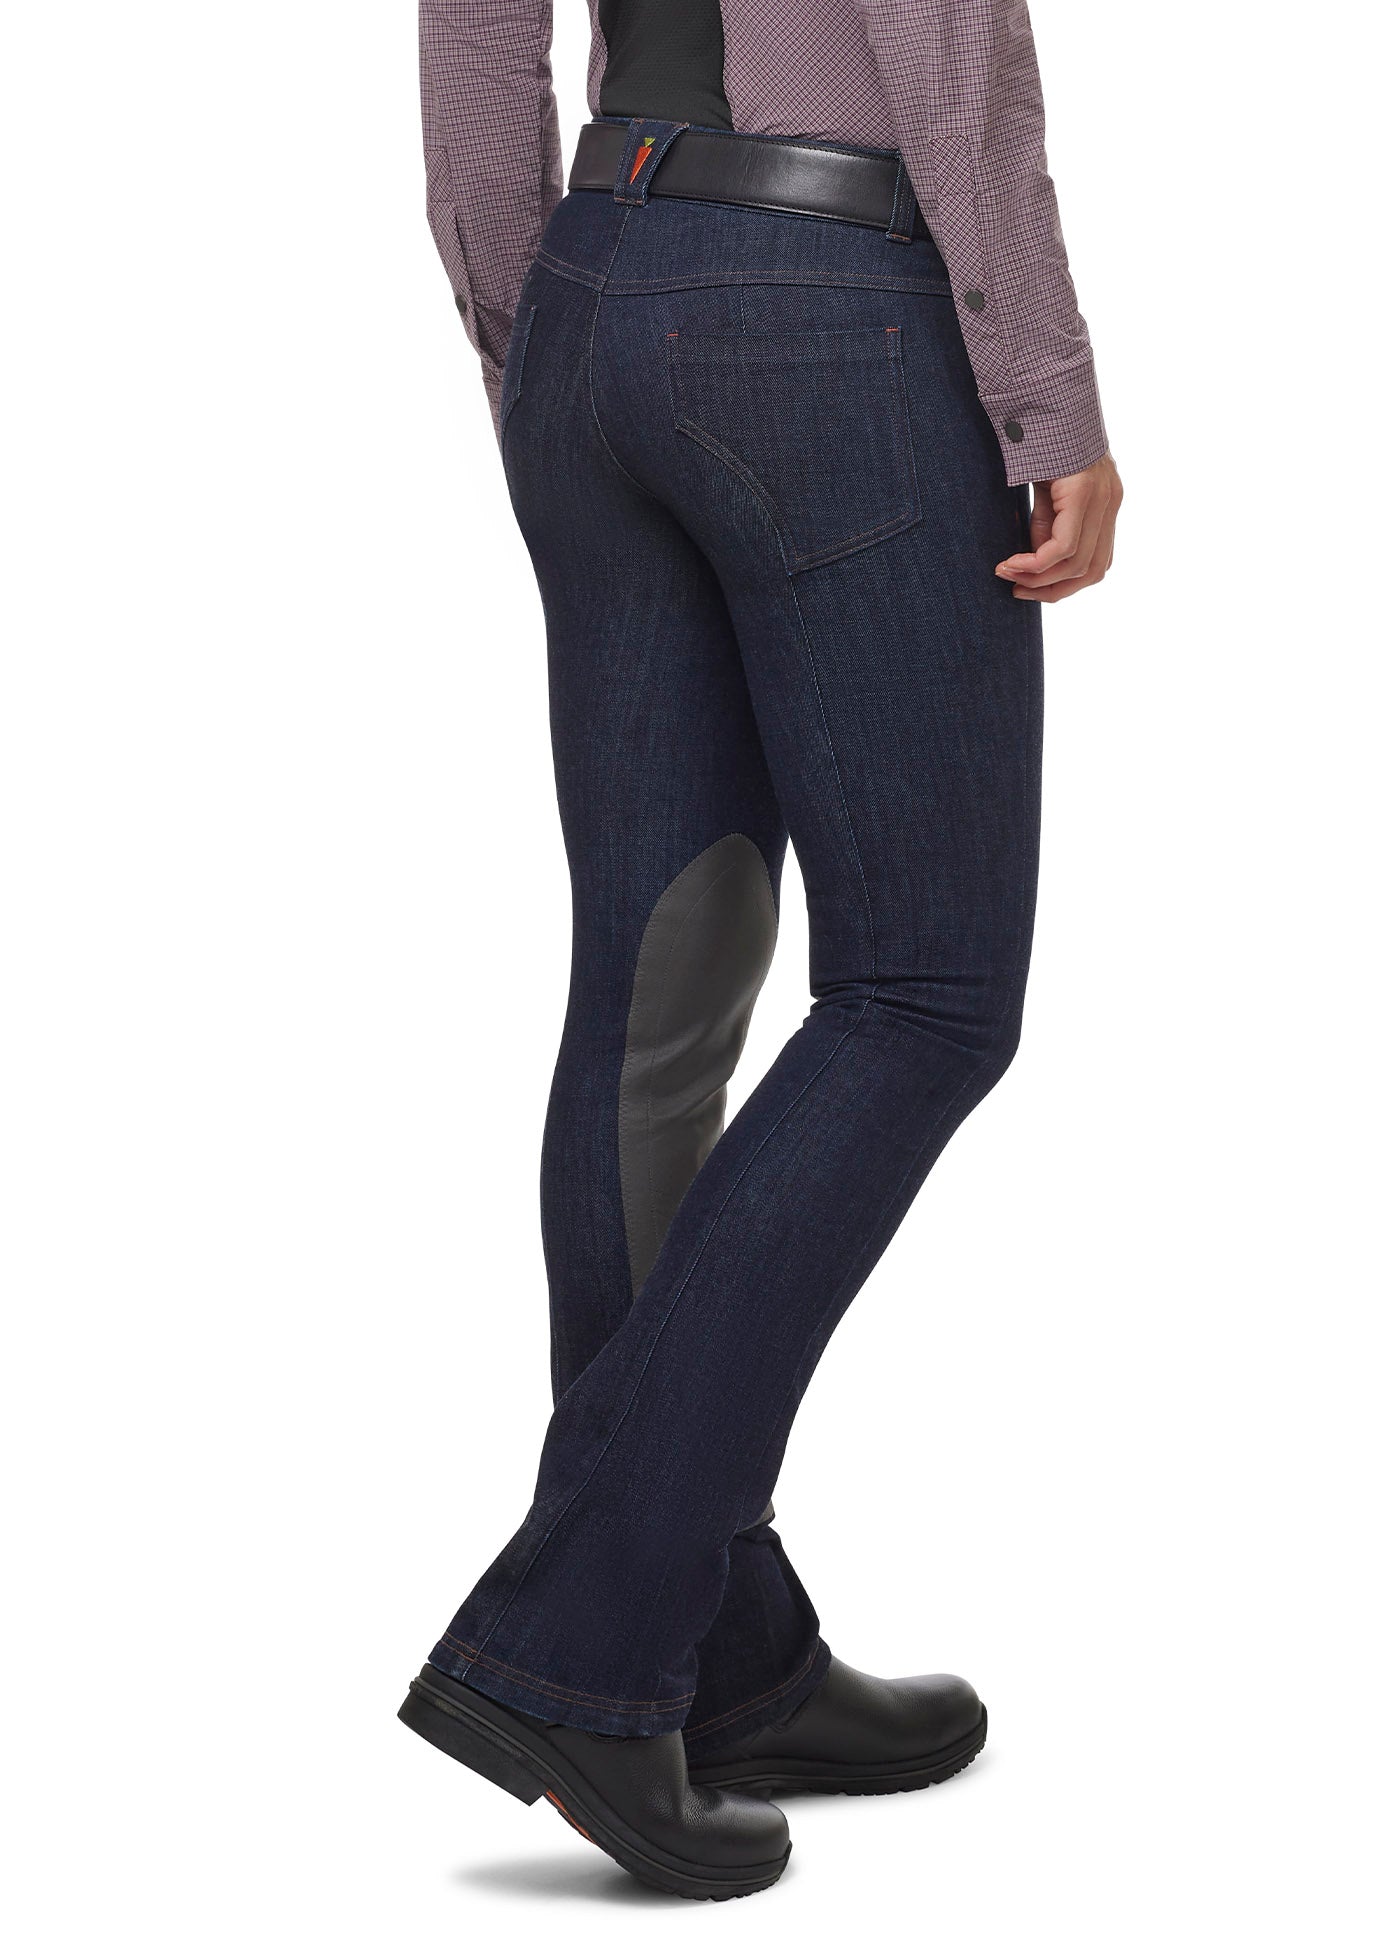 Stretch Denim Extended Knee Patch Bootcut Riding Pant